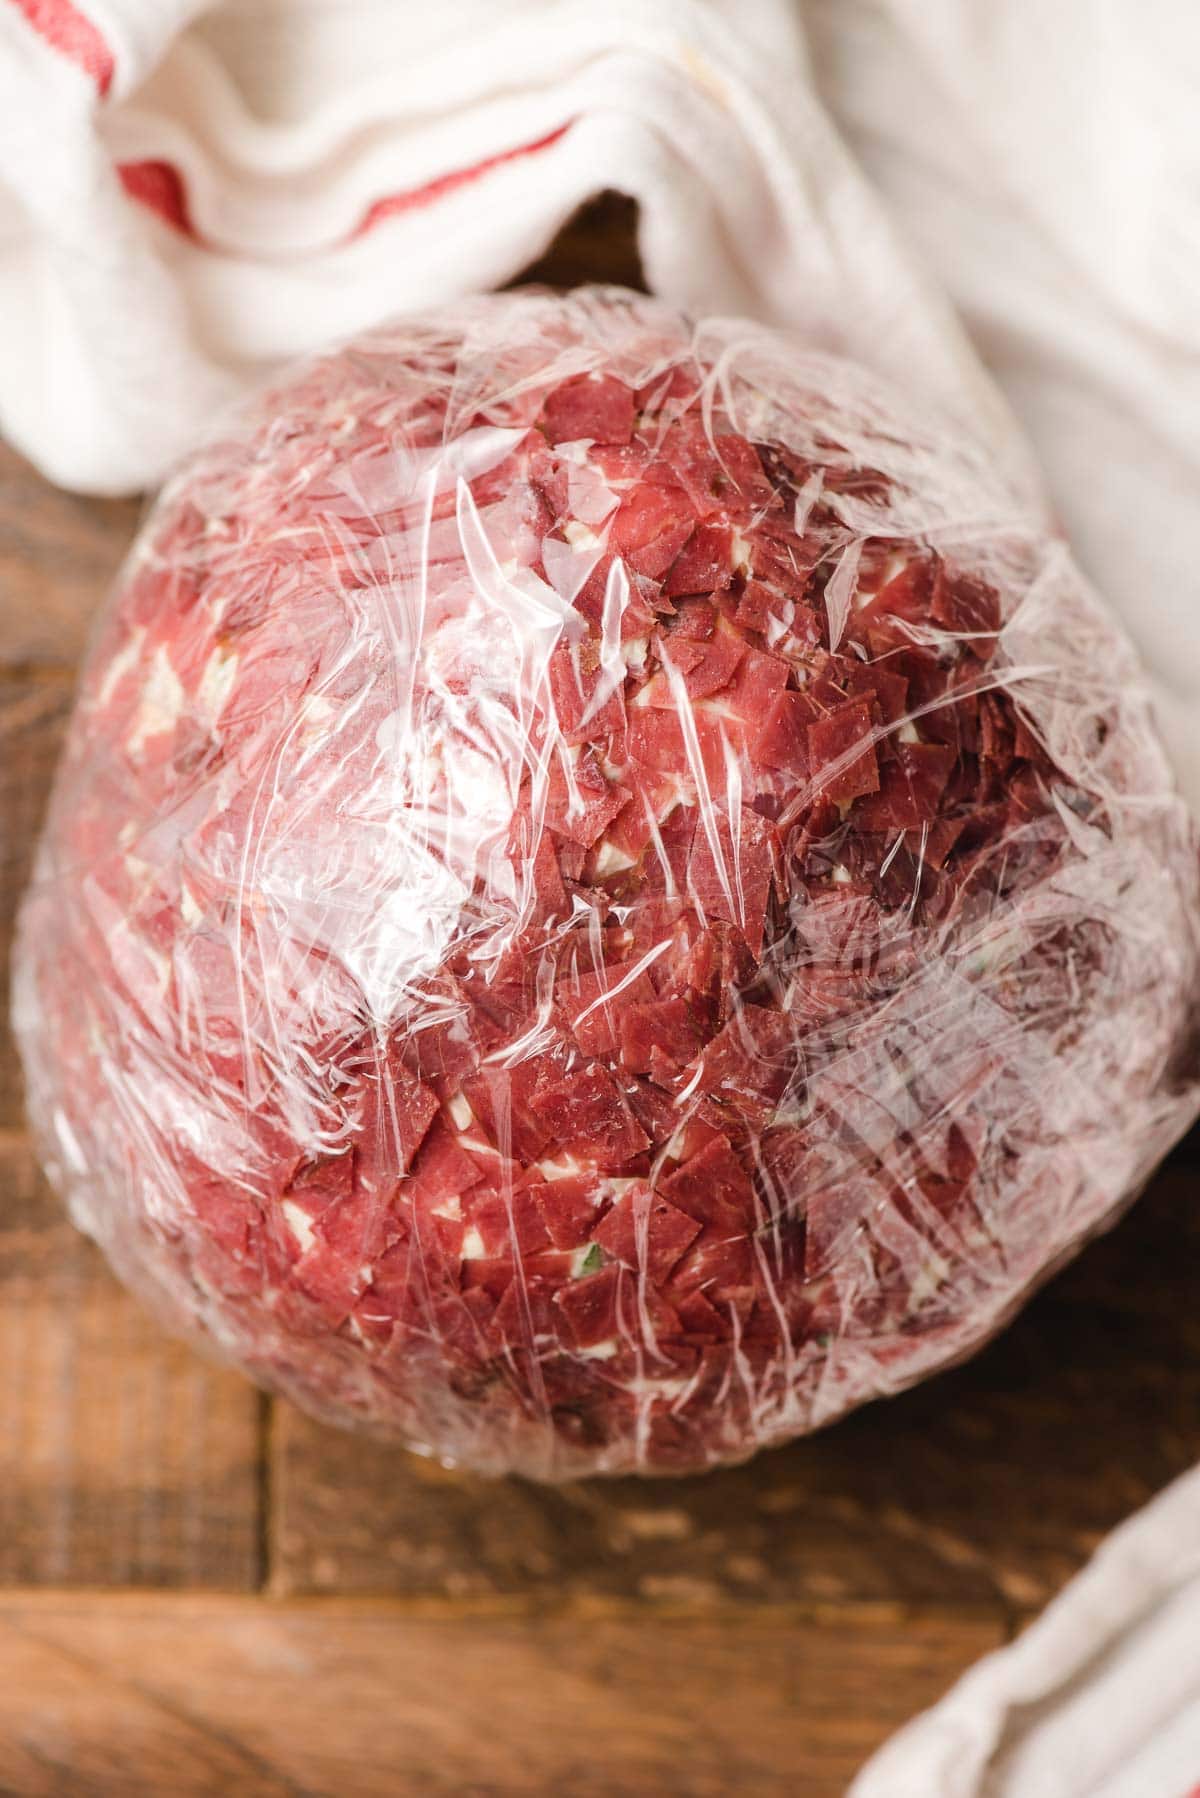 Cheeseball with dried beef wrapped in saran wrap to prepare for freezing.